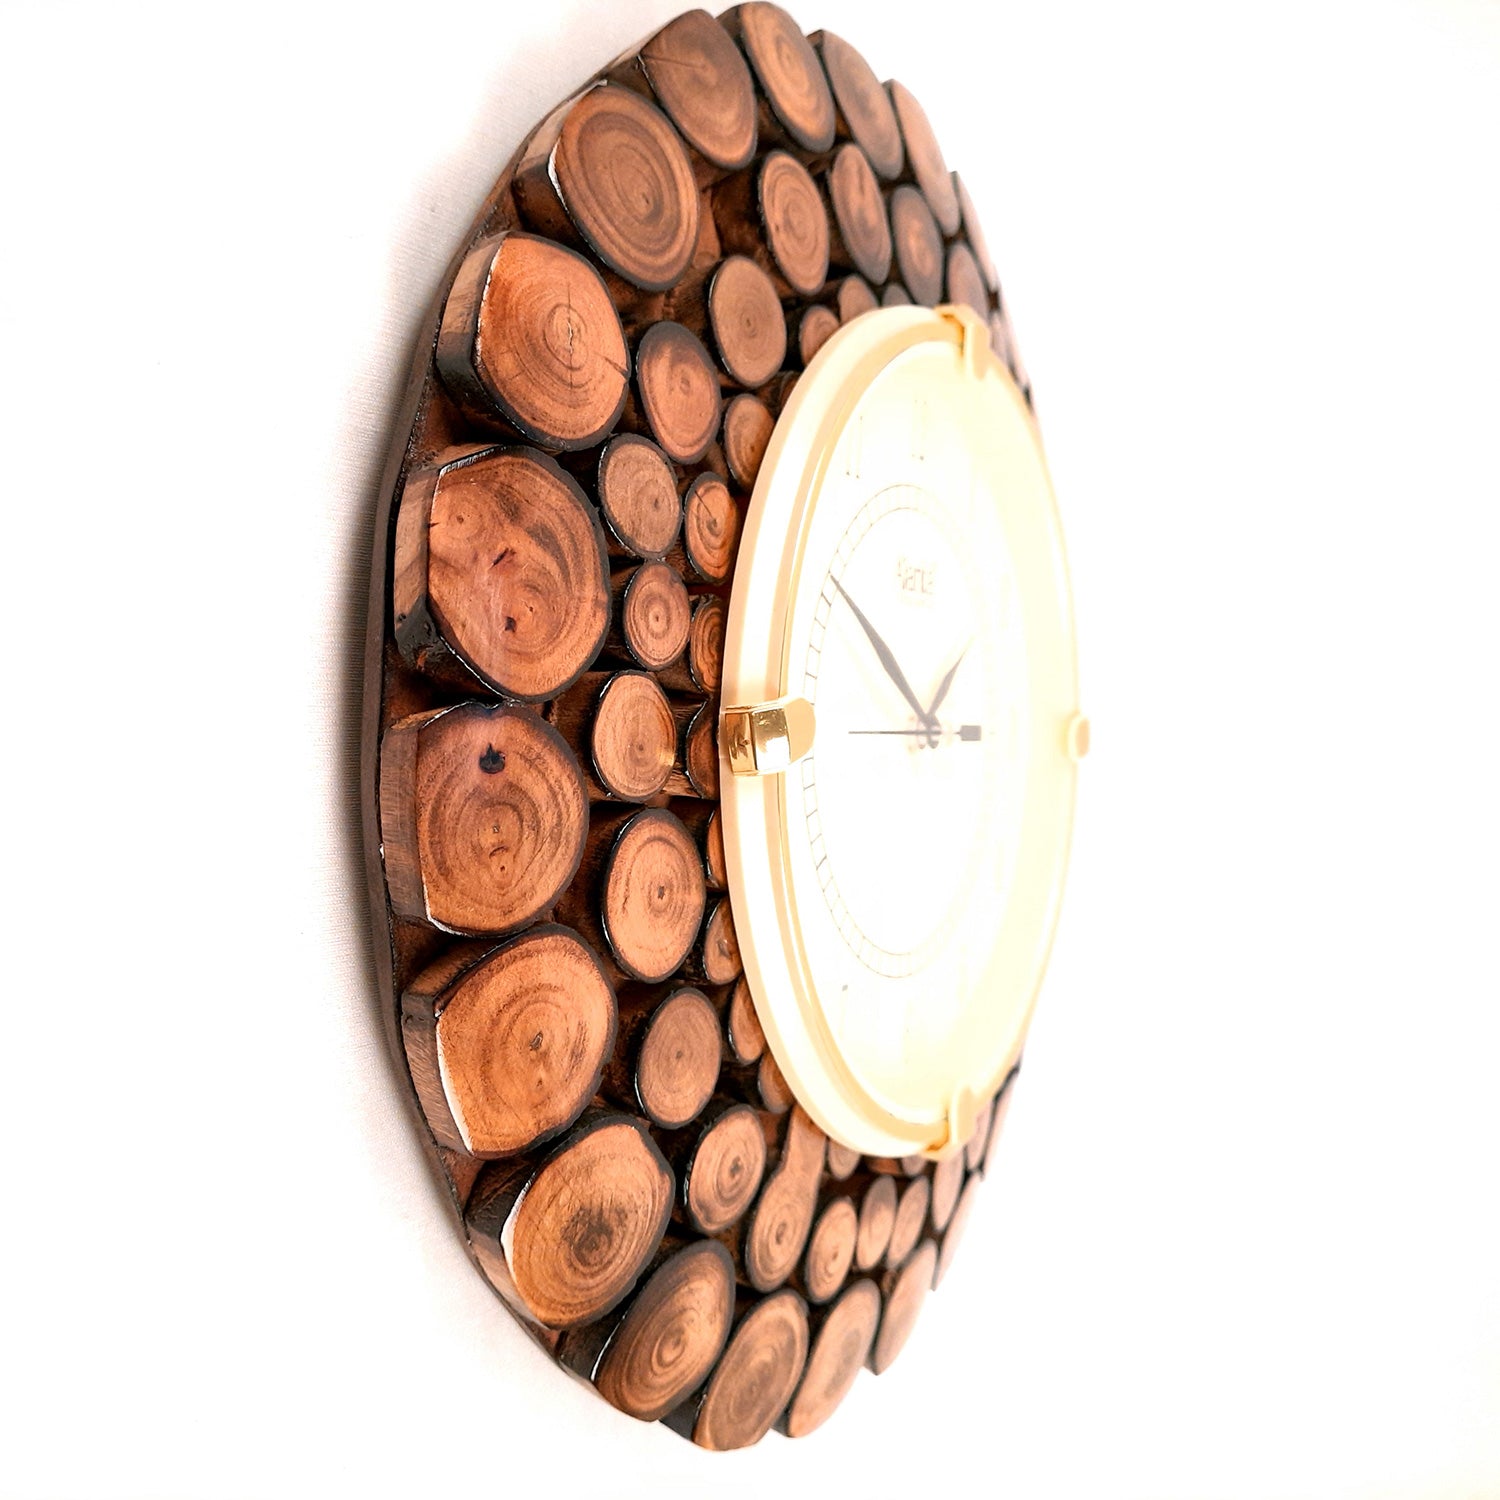 Antique Wall Clock | Analogue Clock With Natural Wood Finish - For Home, Living Room, Bedroom, Hall Decor | Wedding & Housewarming Gift -11 Inch - Apkamart